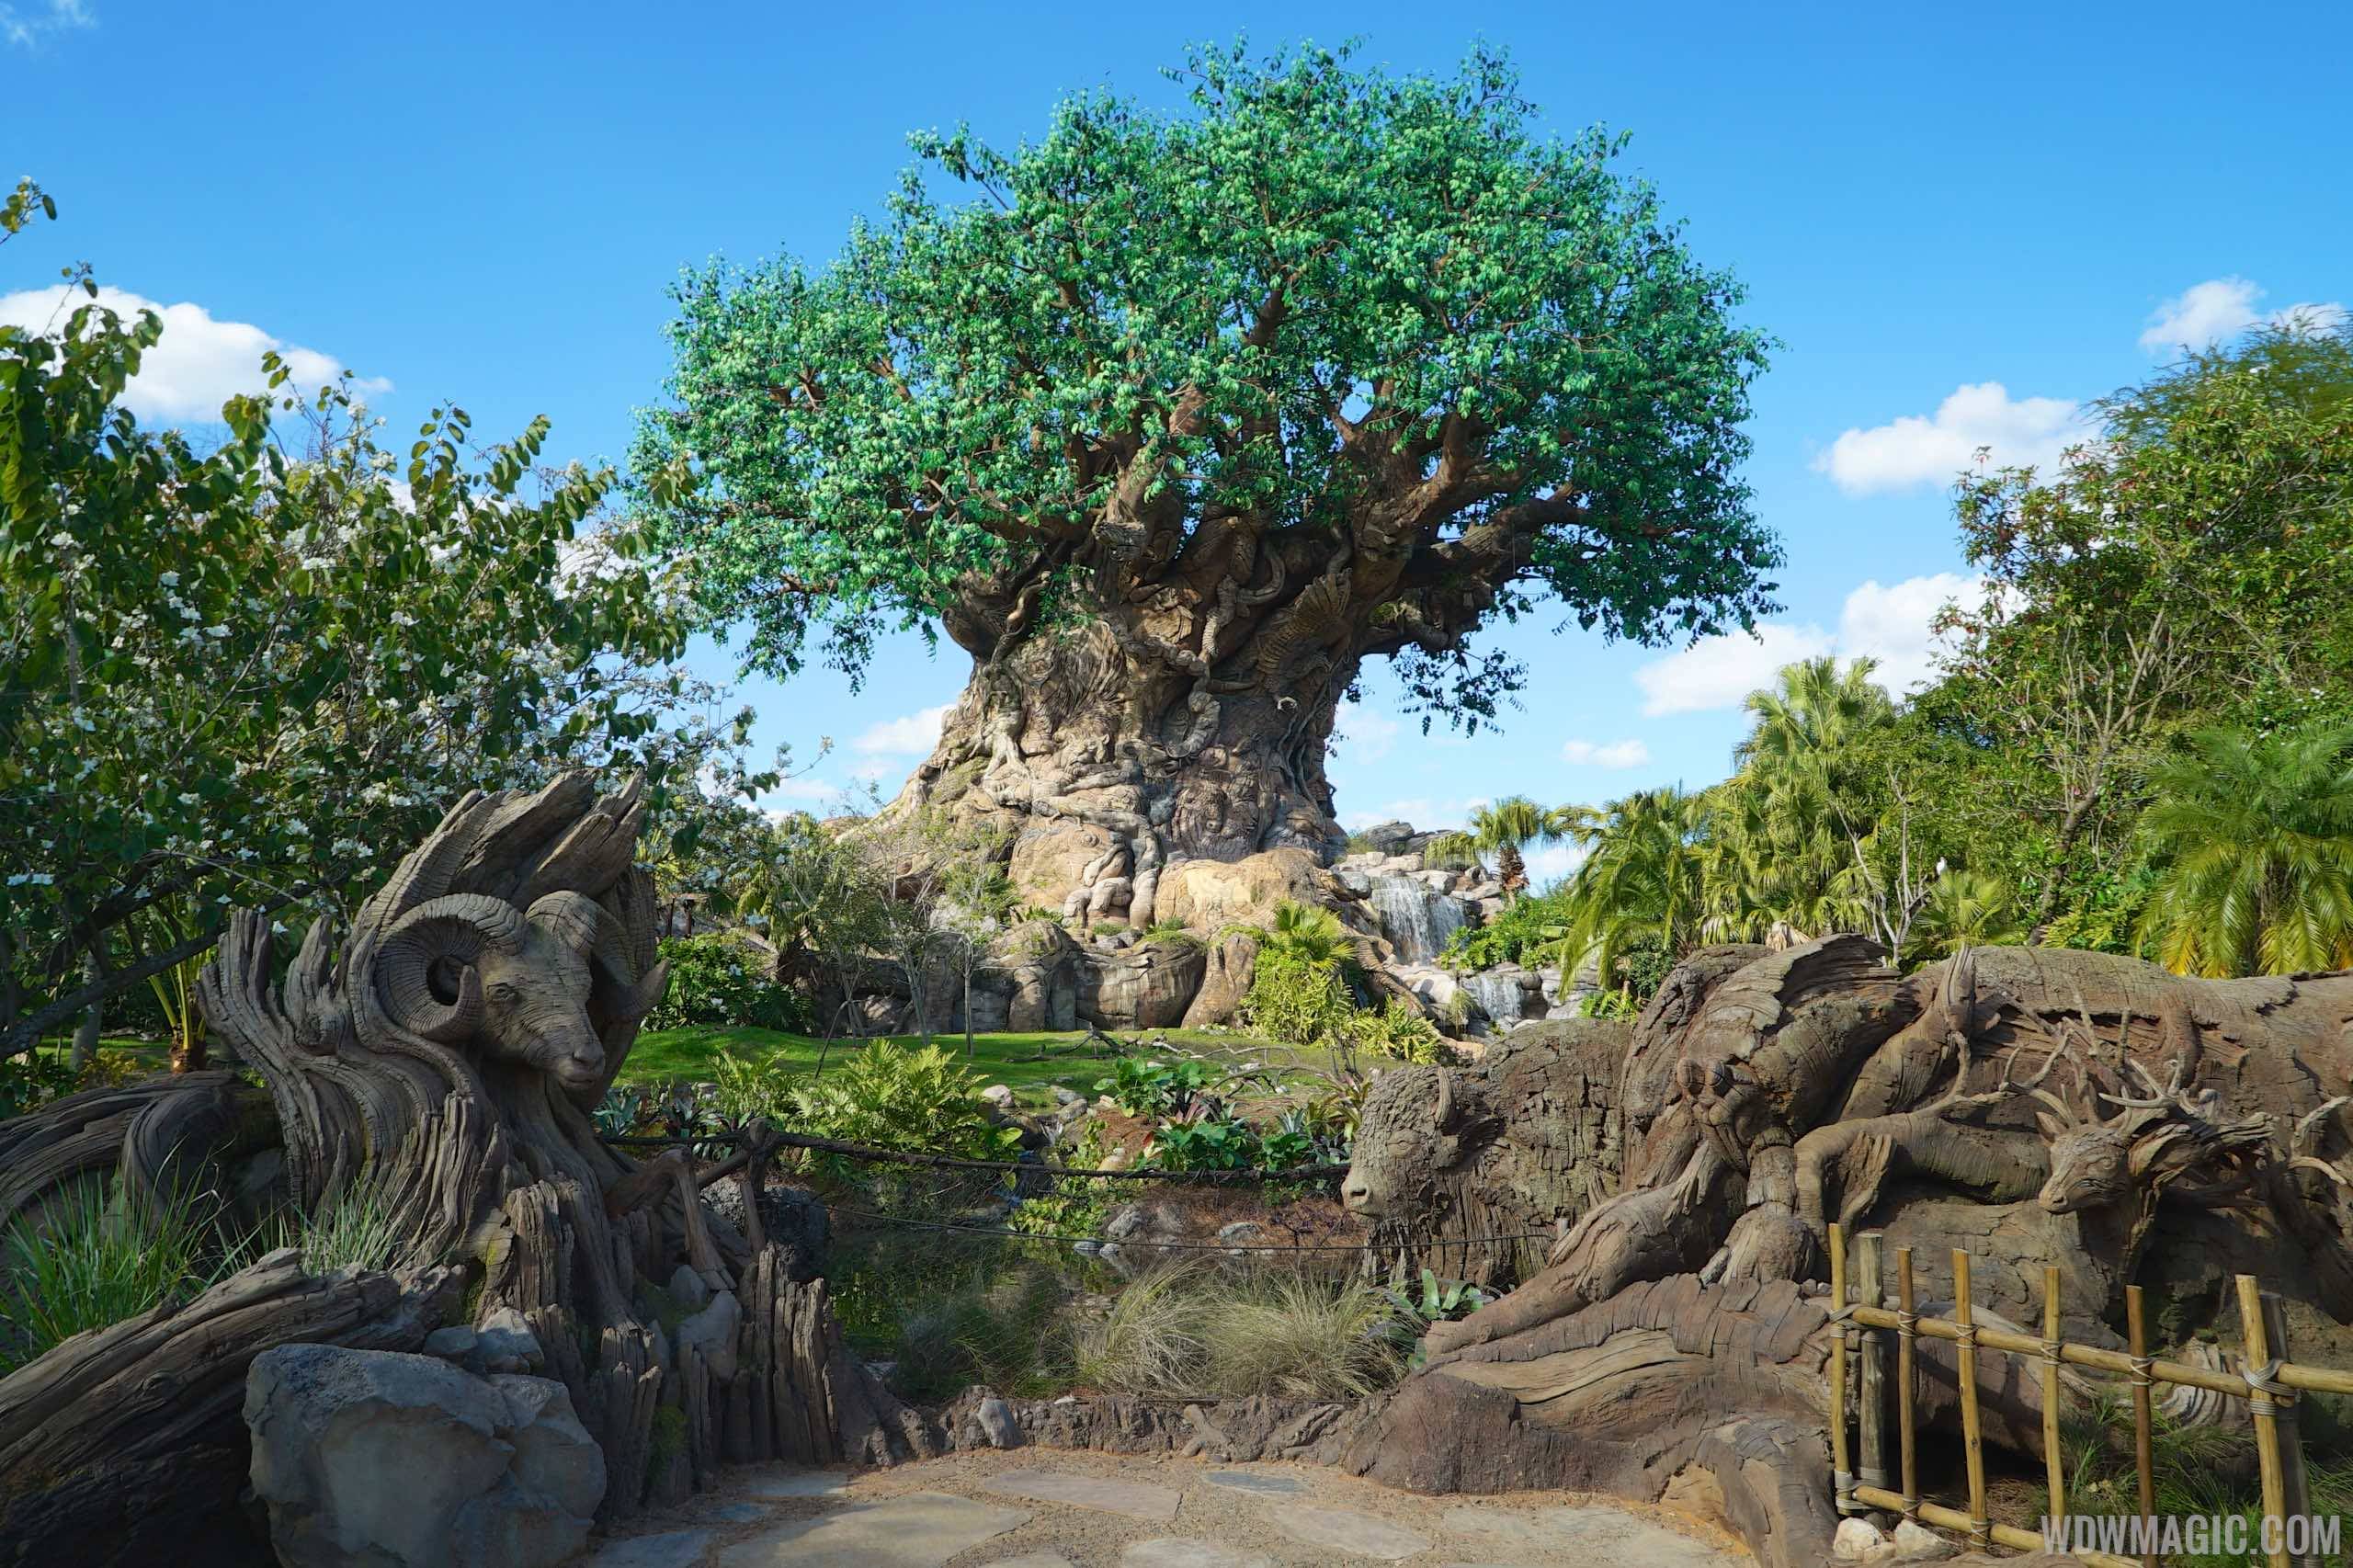 Disney's Animal Kingdom operating hours have been extended on several dates in January 2022